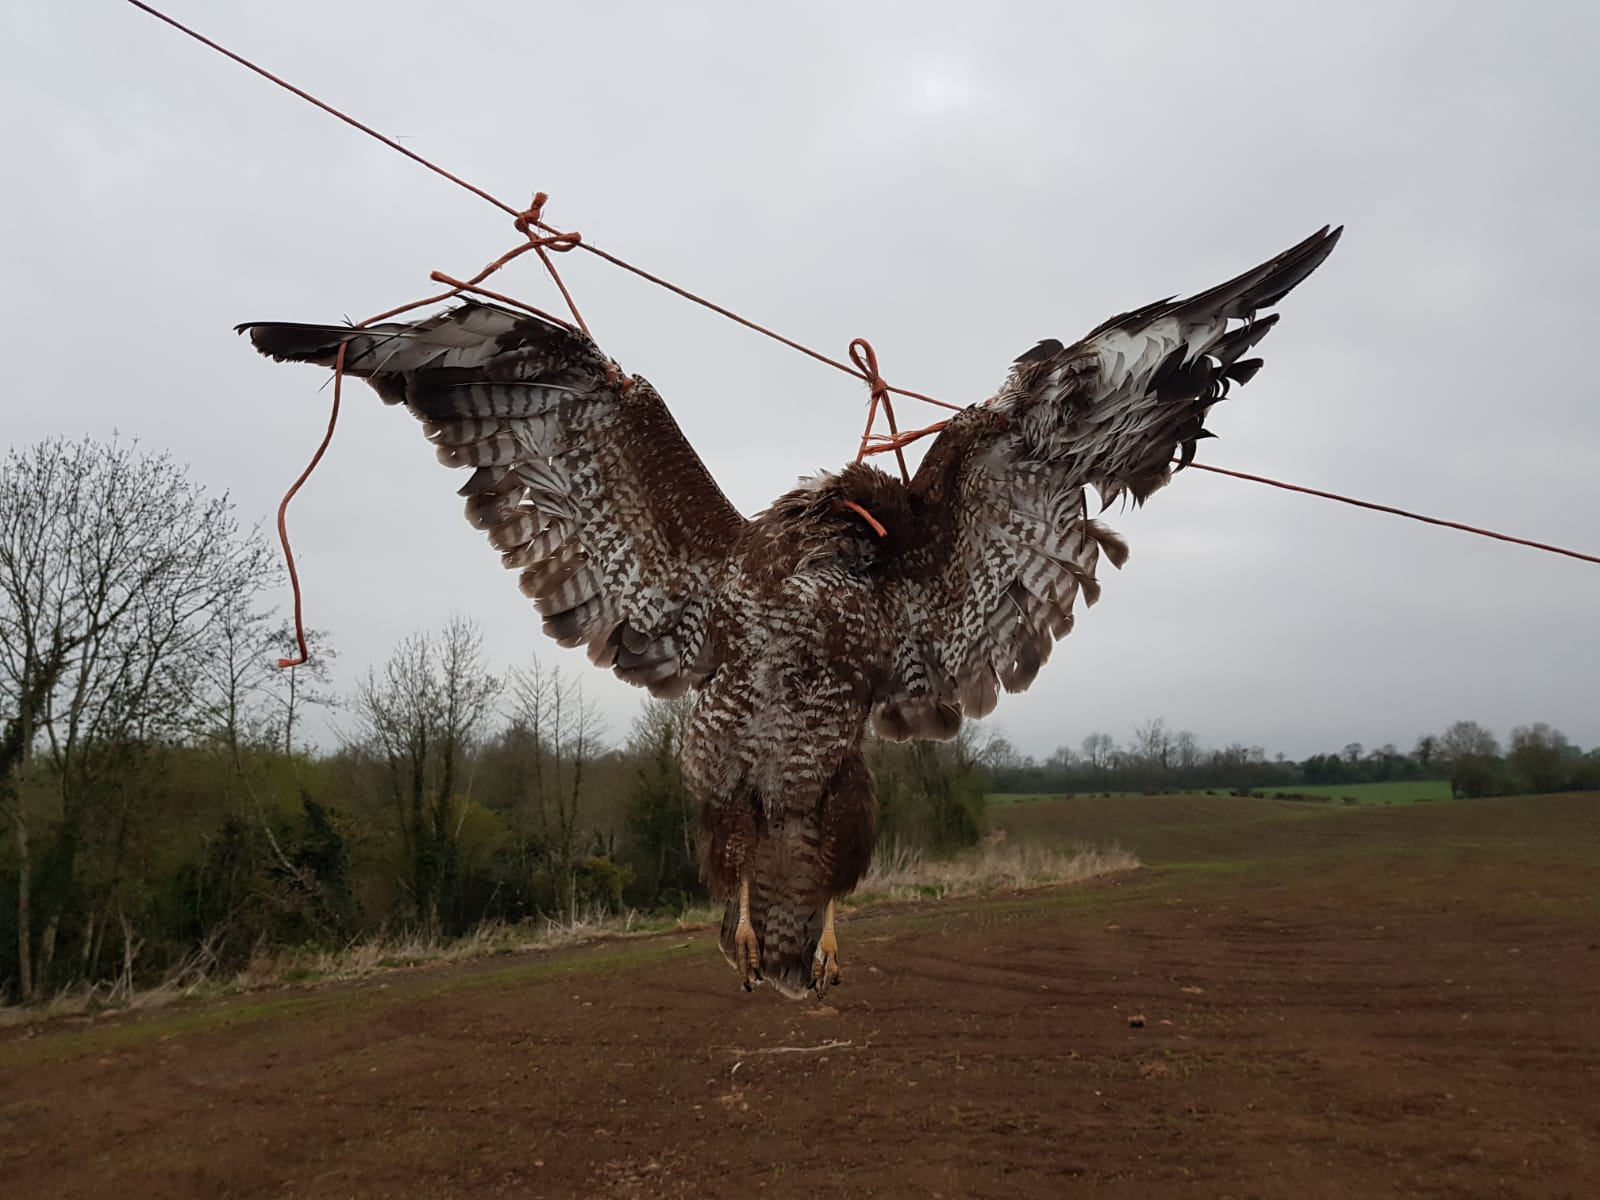 Dead Buzzard Affixed to String